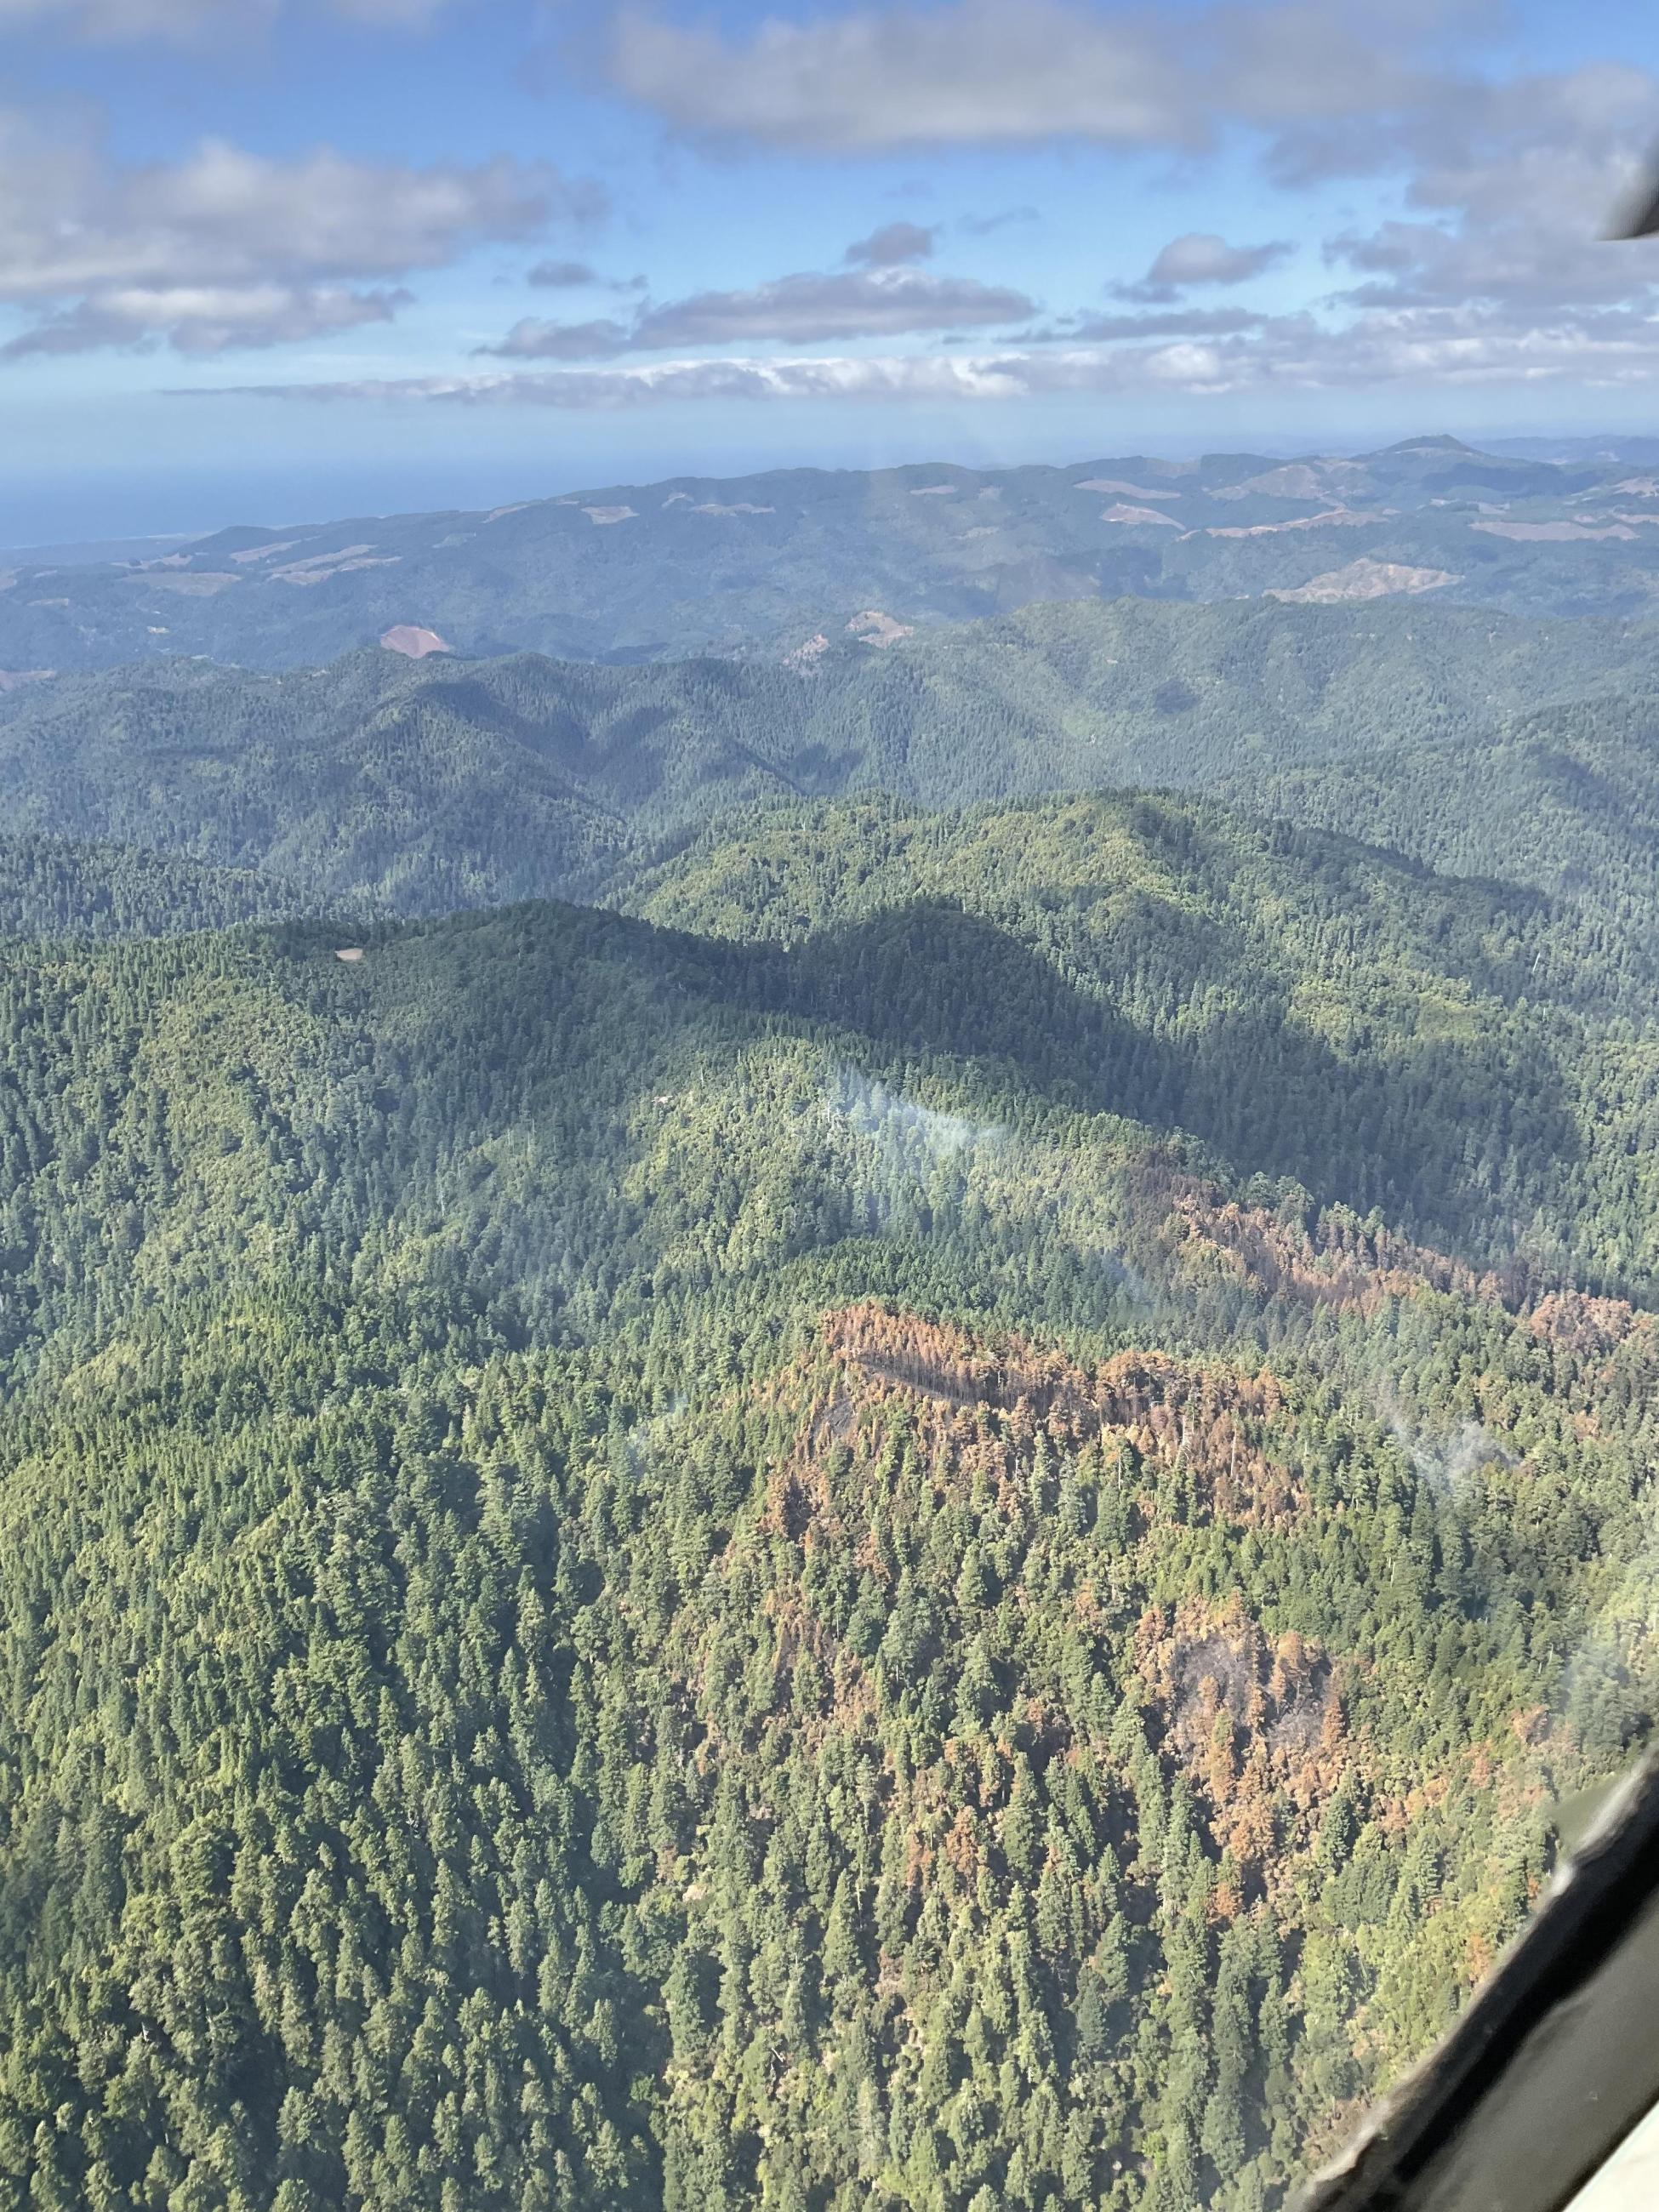 A photo from a helicopter of the forest below where the Anvil Fire is burning. Smoke is minimal and some trees are red from being burned. The ocean can be seen in the distance.